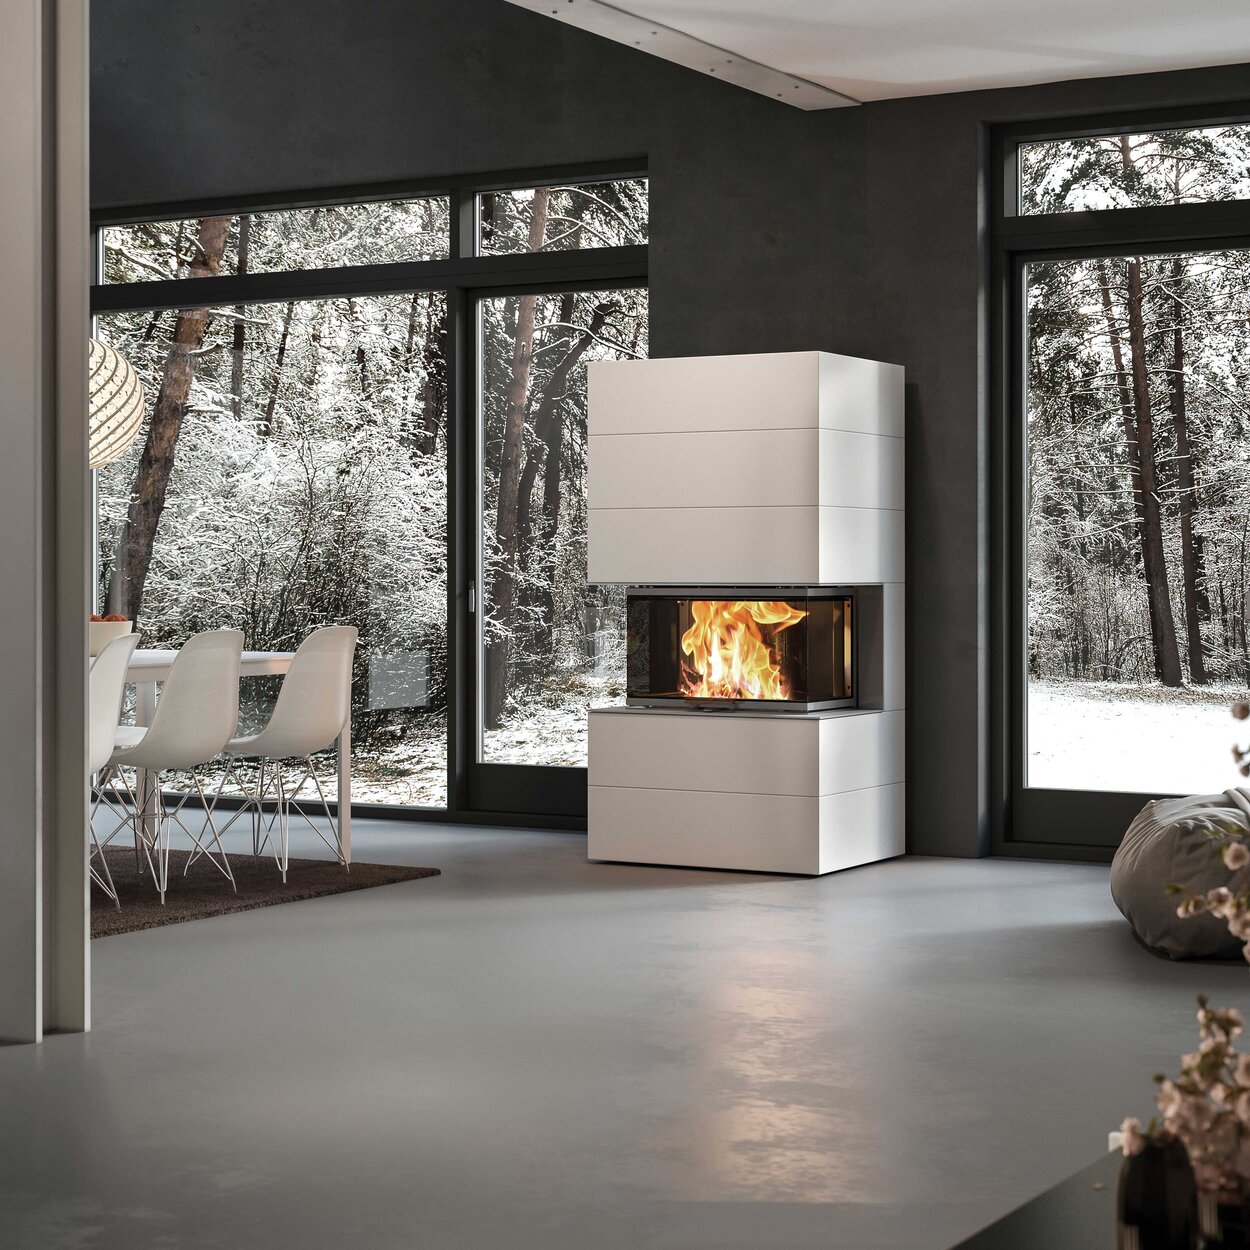 Wood fireplace VISIO 3 ELEMENT installed in white-painted concrete elements as a free-standing 3-sided fireplace in the centre of the room